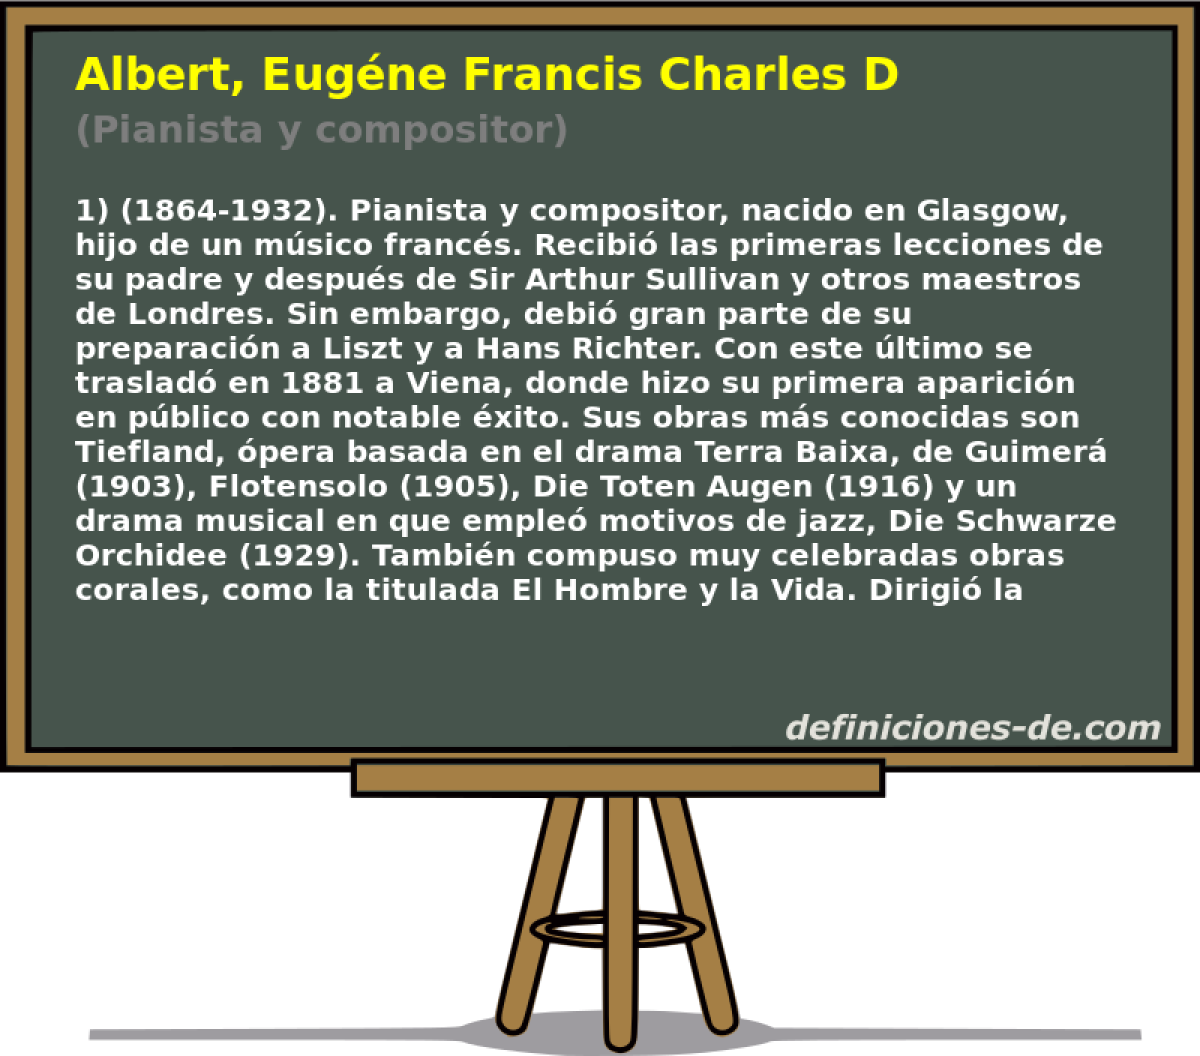 Albert, Eugne Francis Charles D (Pianista y compositor)